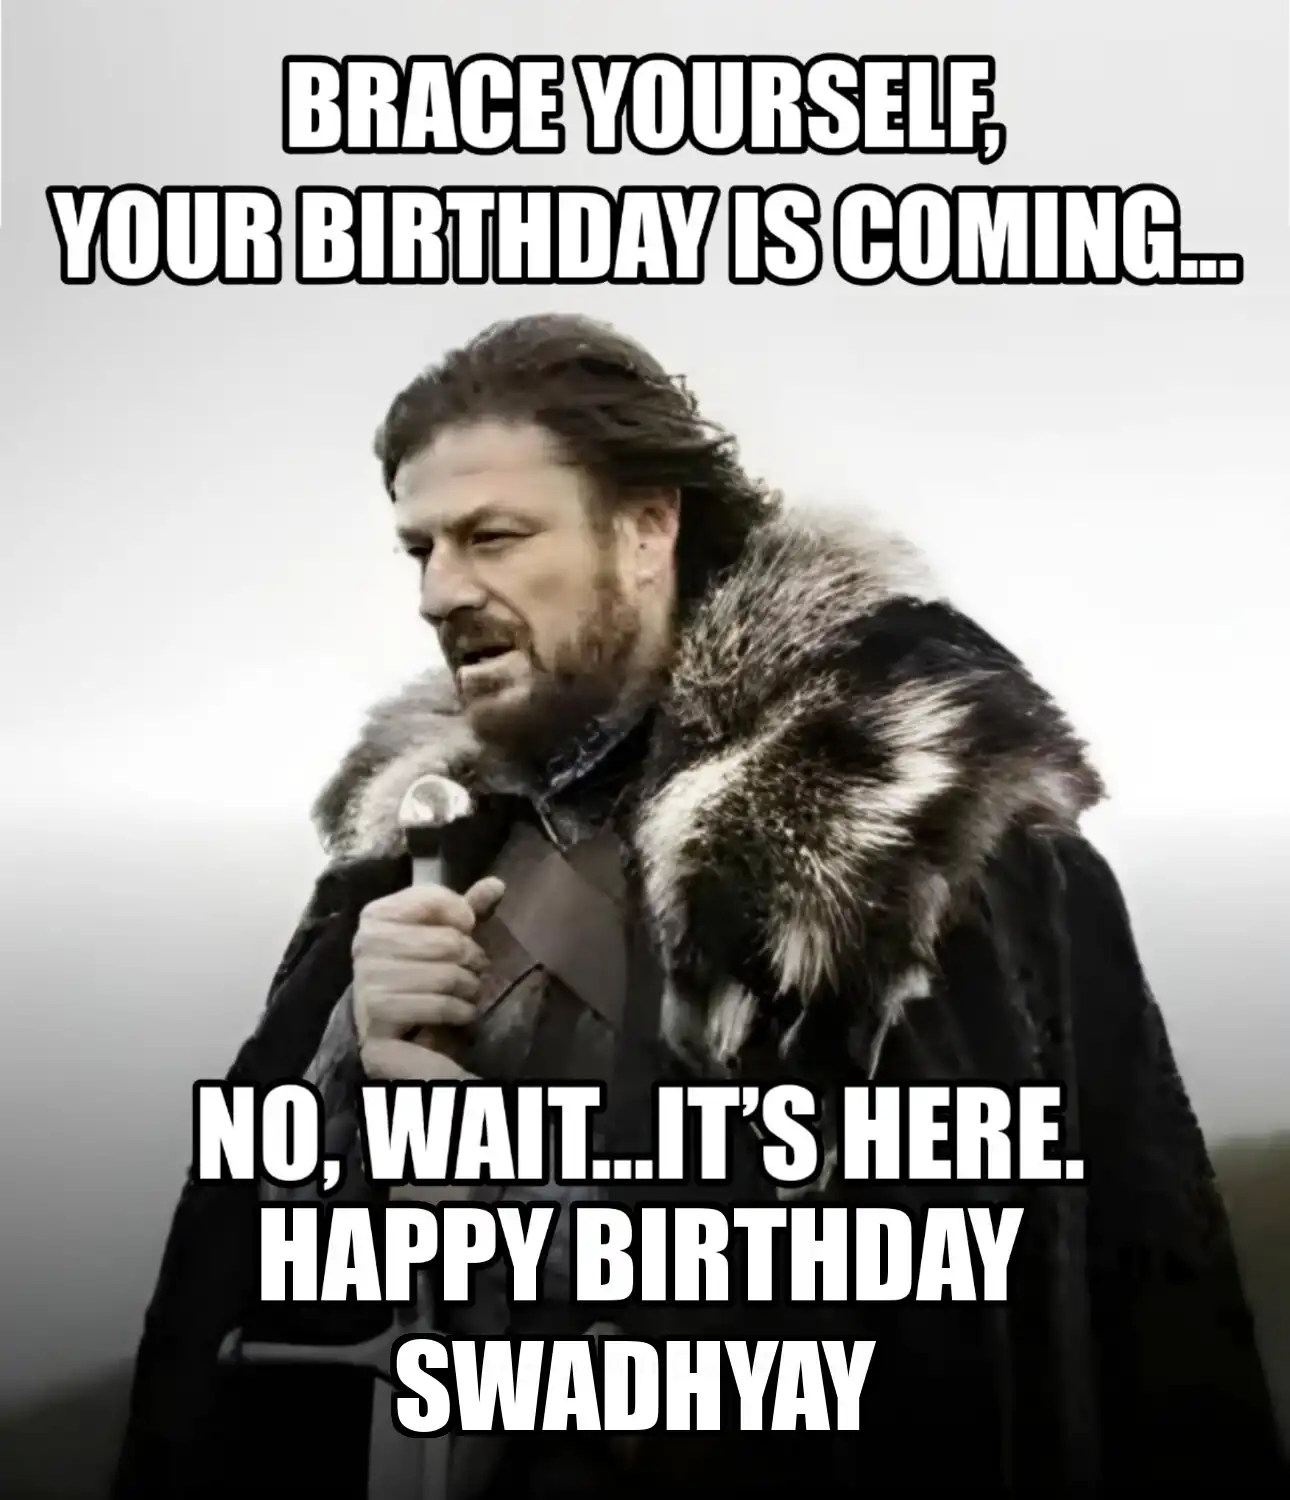 Happy Birthday Swadhyay Brace Yourself Your Birthday Is Coming Meme